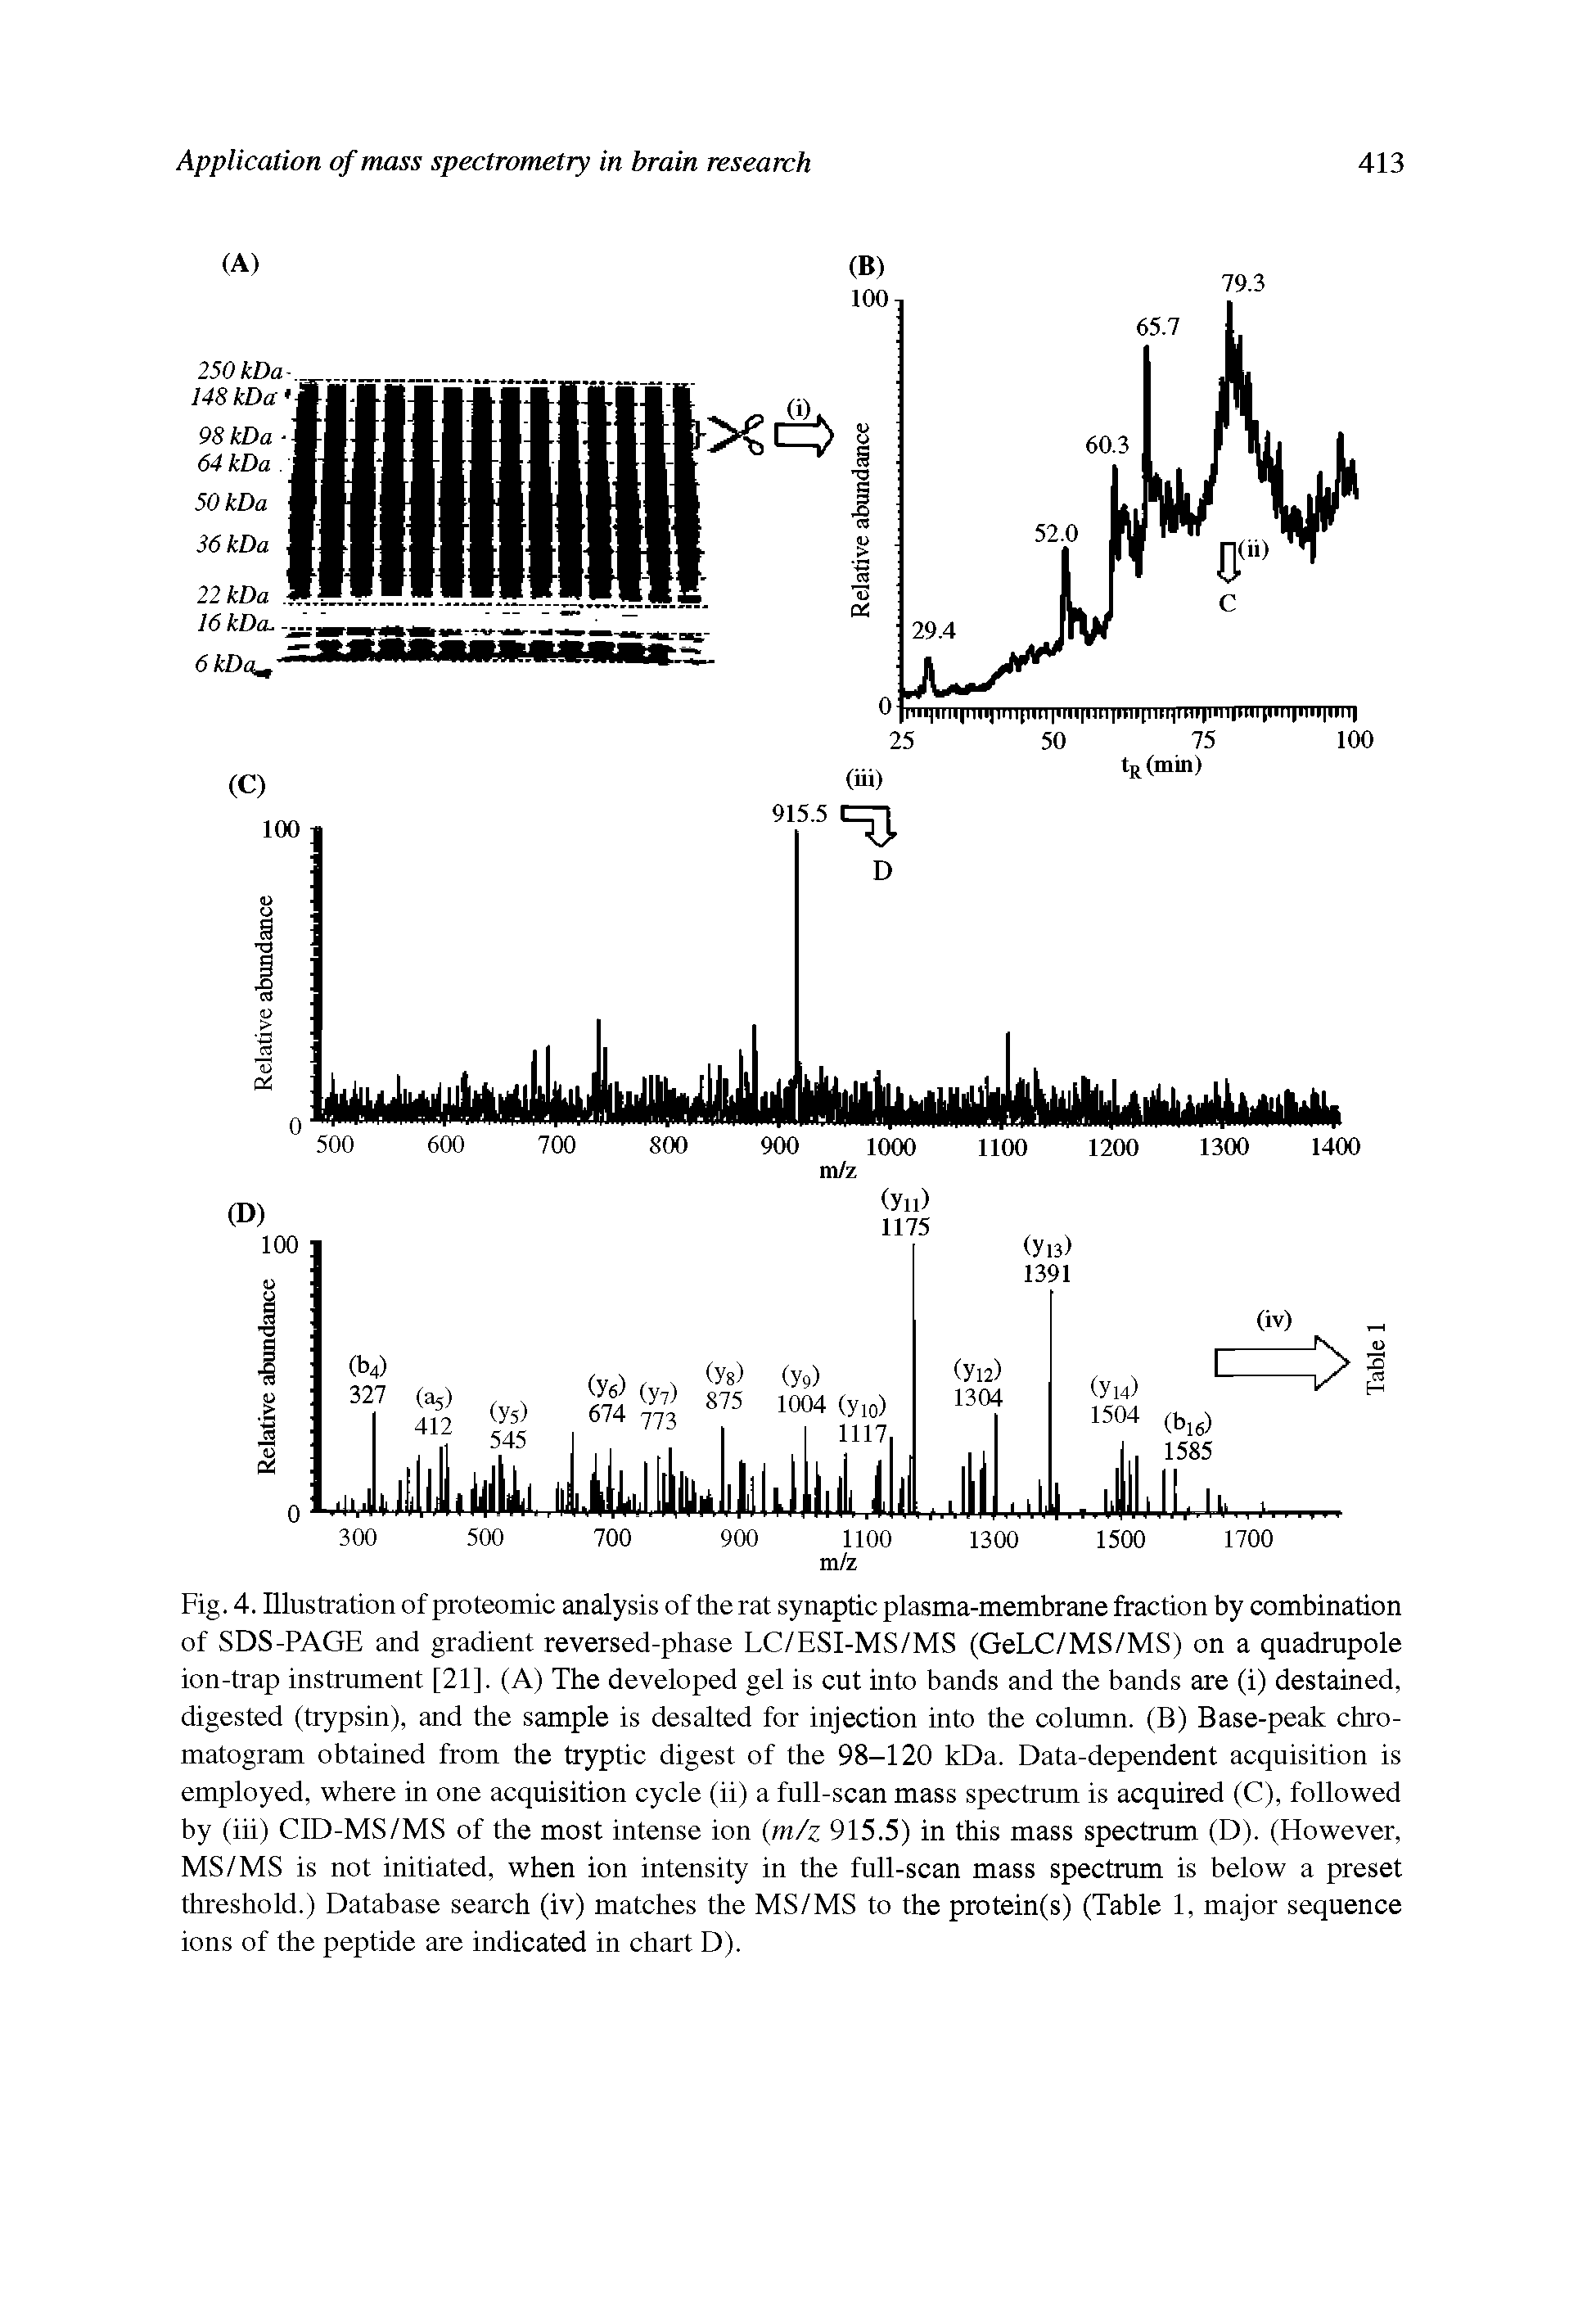 Fig. 4. Illustration of proteomic analysis of the rat synaptic plasma-membrane fraction by combination of SDS-PAGE and gradient reversed-phase LC/ESI-MS/MS (GeLC/MS/MS) on a quadrupole ion-trap instrument [21]. (A) The developed gel is cut into bands and the bands are (i) destained, digested (trypsin), and the sample is desalted for injection into the column. (B) Base-peak chromatogram obtained from the tryptic digest of the 98-120 kDa. Data-dependent acquisition is employed, where in one acquisition cycle (ii) a full-scan mass spectrum is acquired (C), followed by (iii) CID-MS/MS of the most intense ion (m/z 915.5) in this mass spectrum (D). (However, MS/MS is not initiated, when ion intensity in the full-scan mass spectrum is below a preset threshold.) Database search (iv) matches the MS/MS to the protein(s) (Table 1, major sequence ions of the peptide are indicated in chart D).